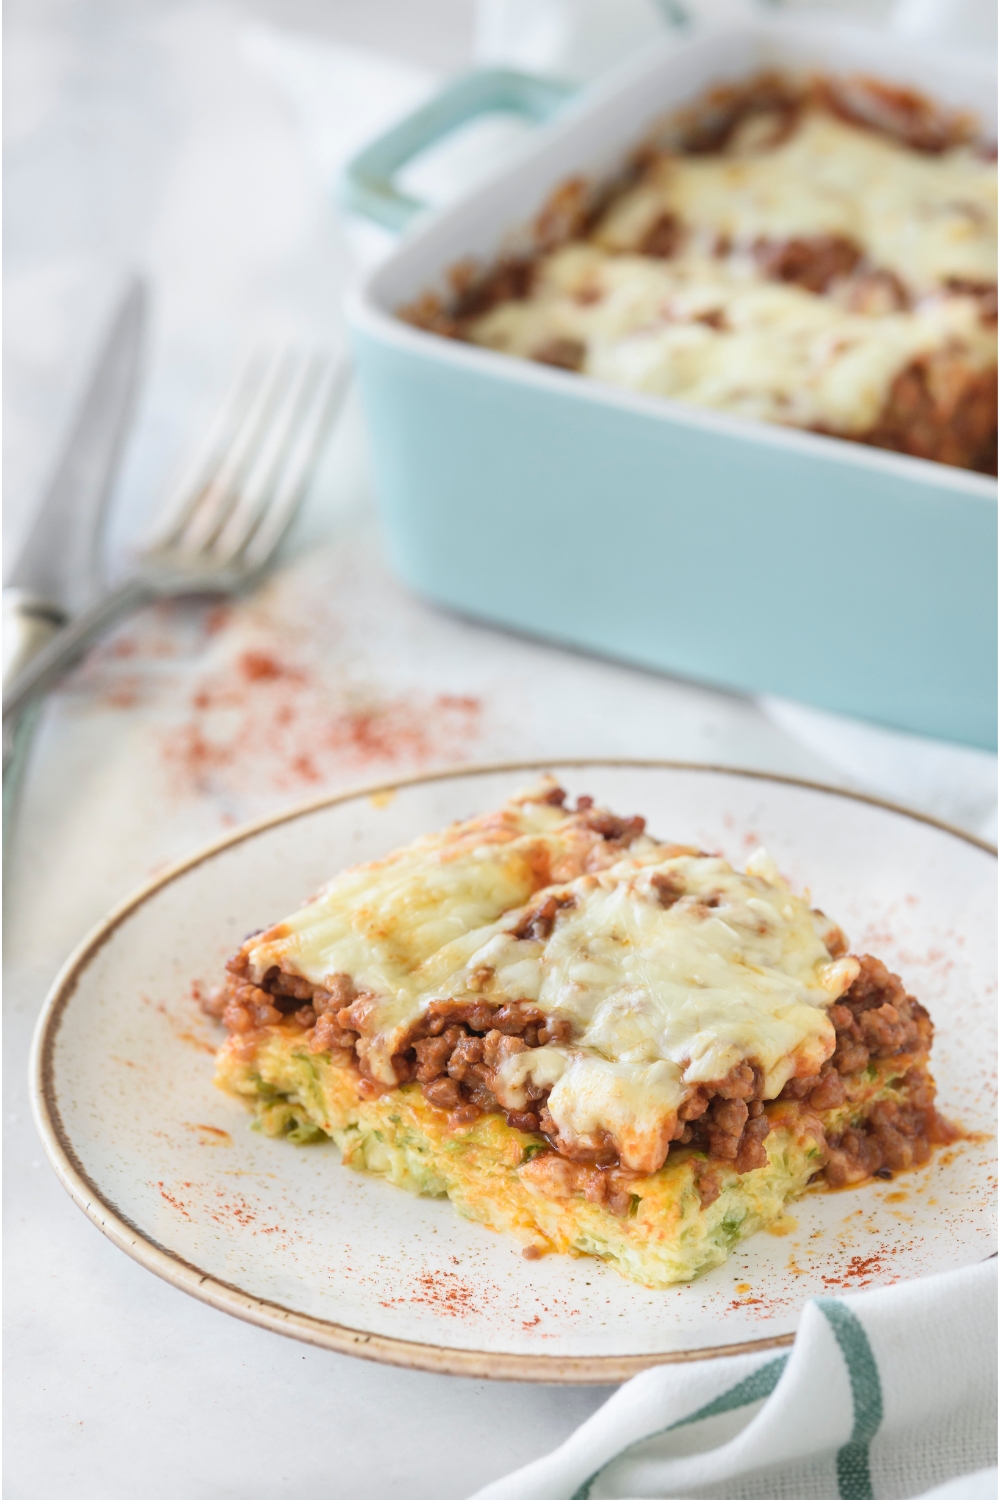 A square serving of zucchini pizza casserole topped with a layer of melted cheese and dusted with paprika. The rest of the casserole is in the background.